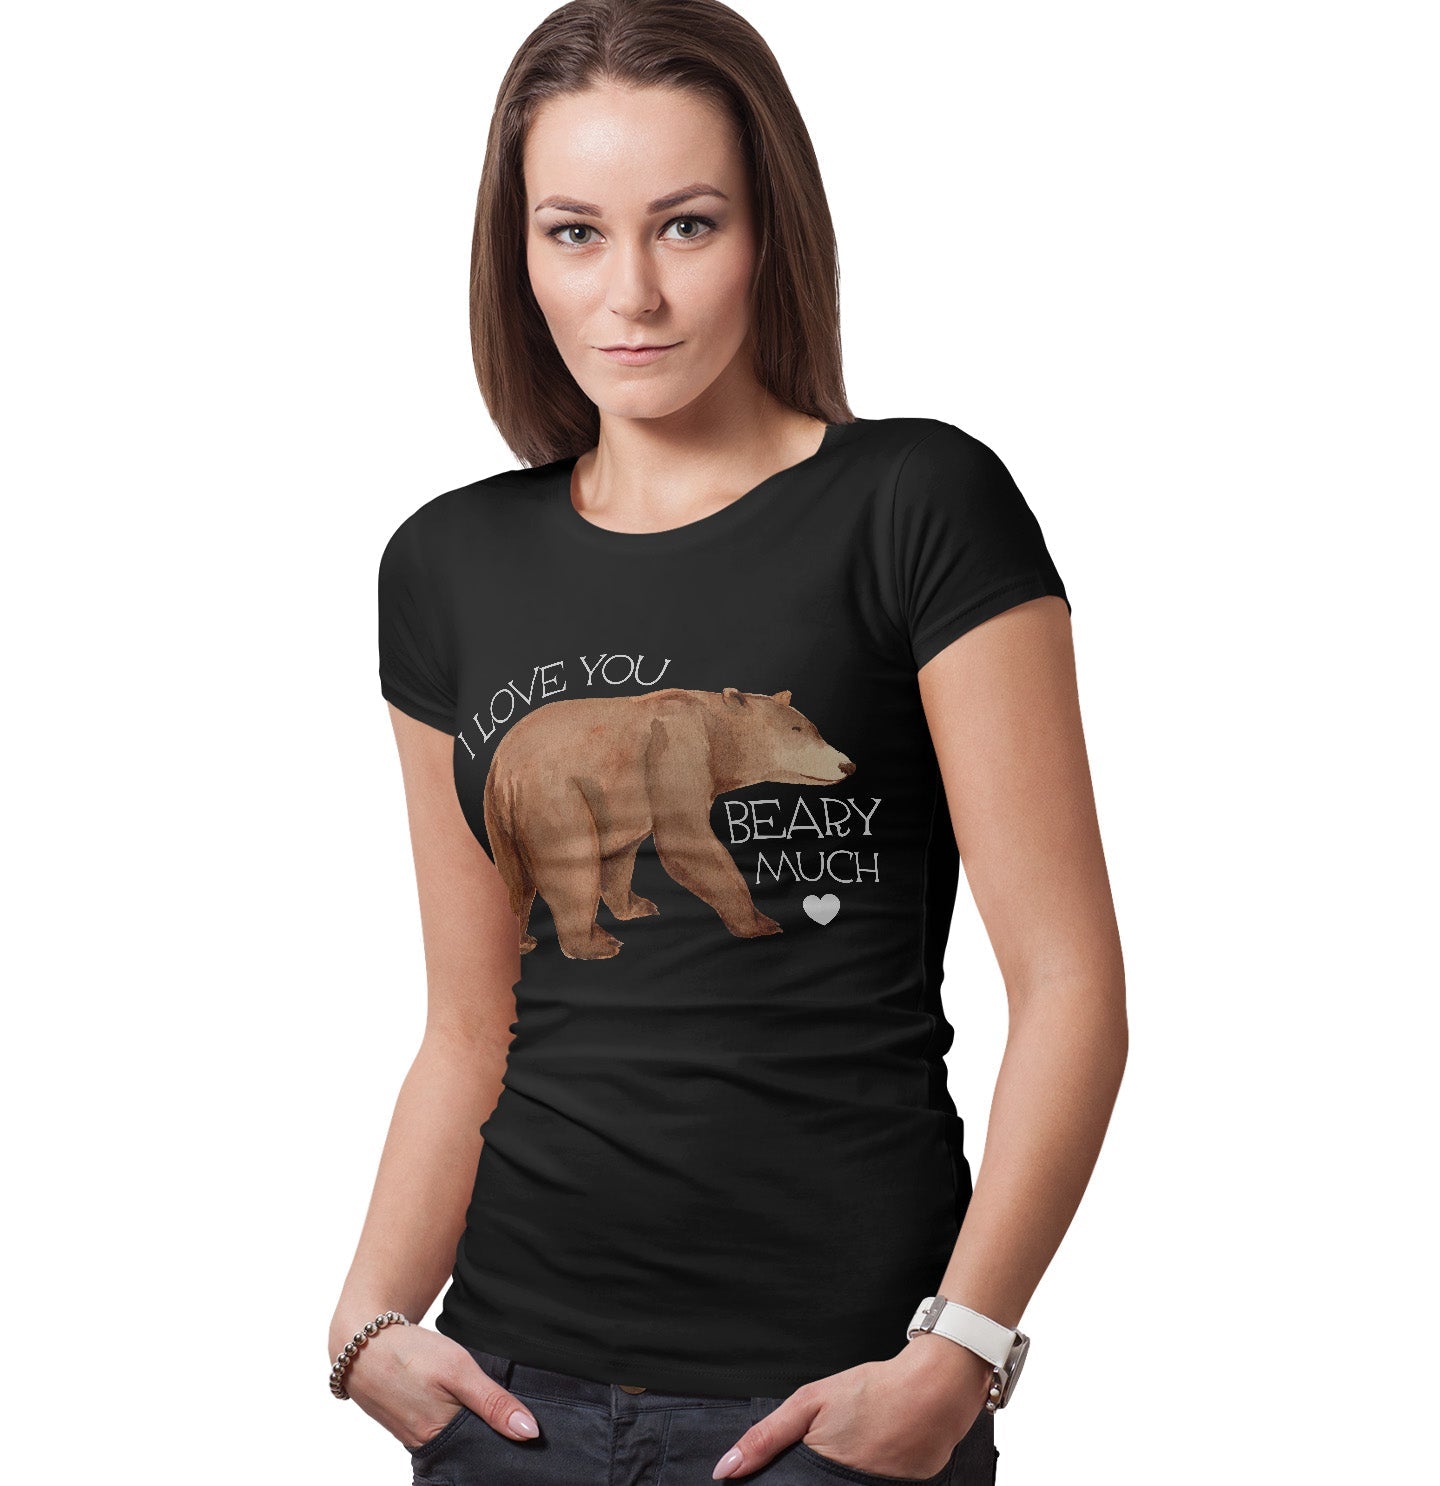 I Love You Beary Much - Women's Fitted T-Shirt